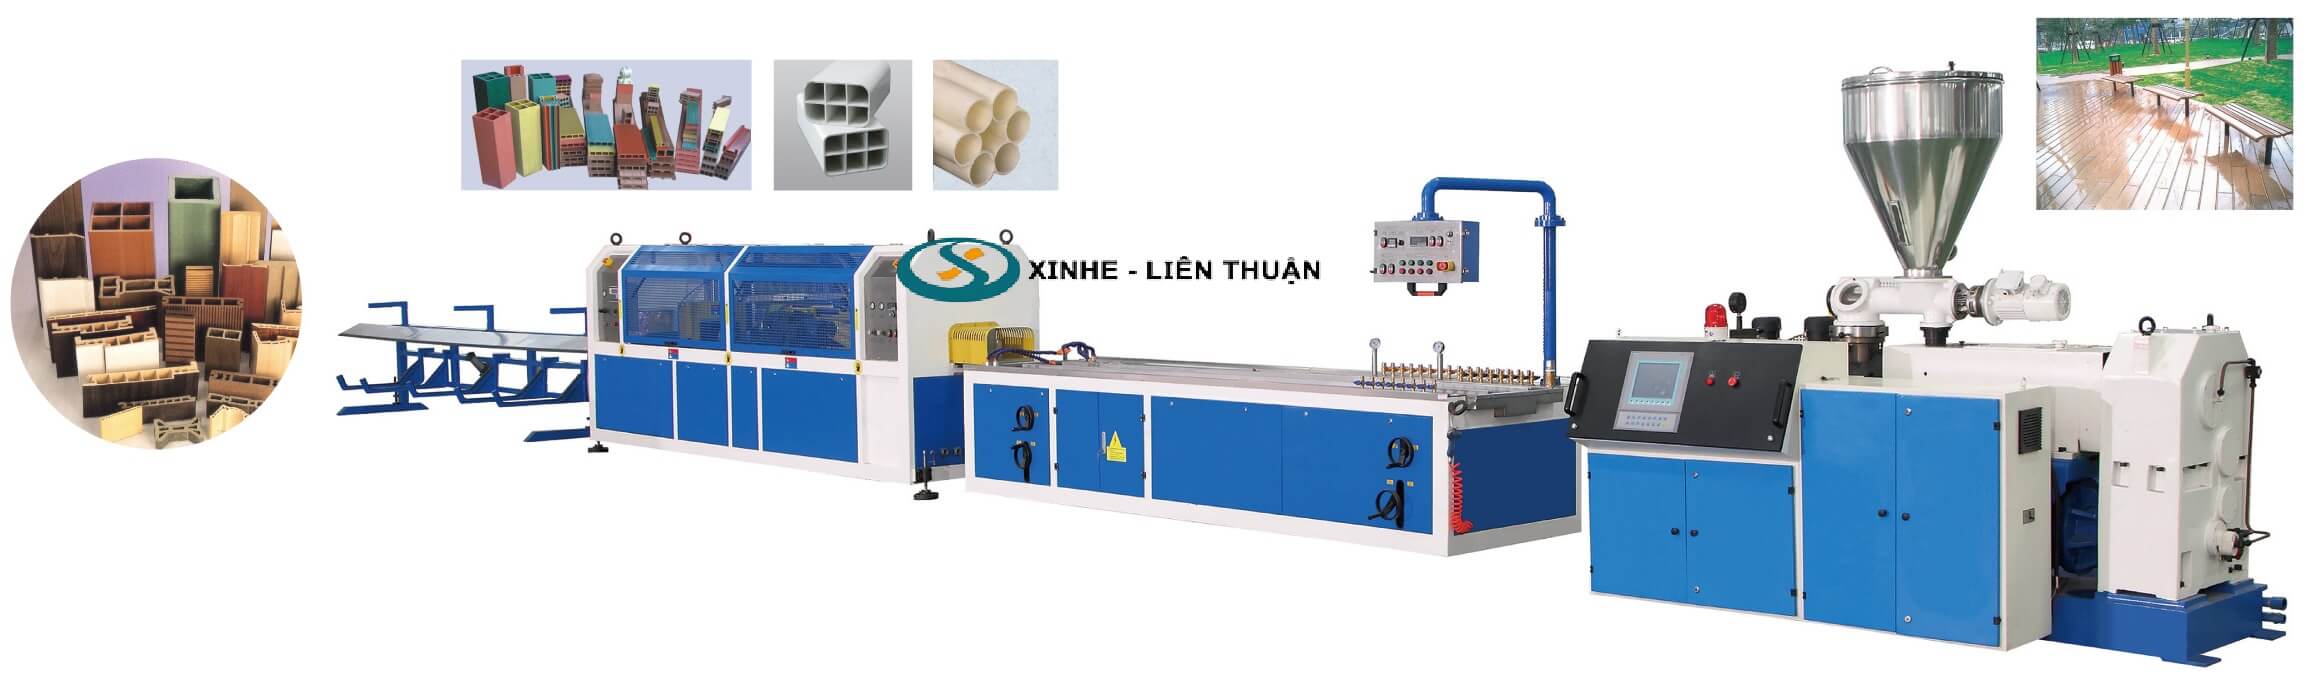 PVC Wood-Plastic Profile and Extrusion Line